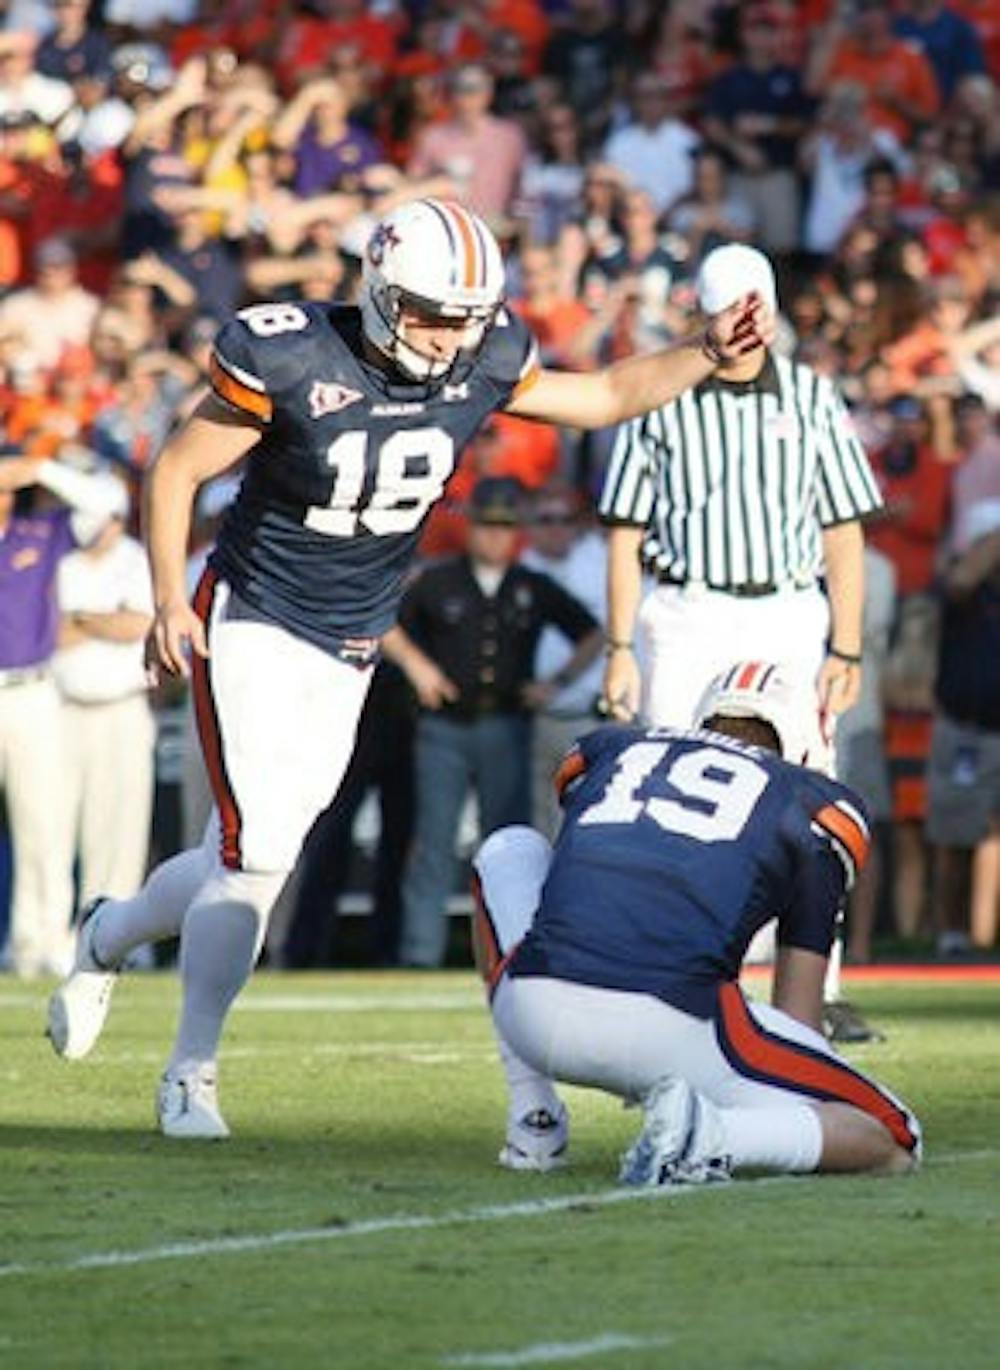 Senior place kicker Wes Byrum attempts an extra point against LSU. (Emily Adams / Photo Editor)